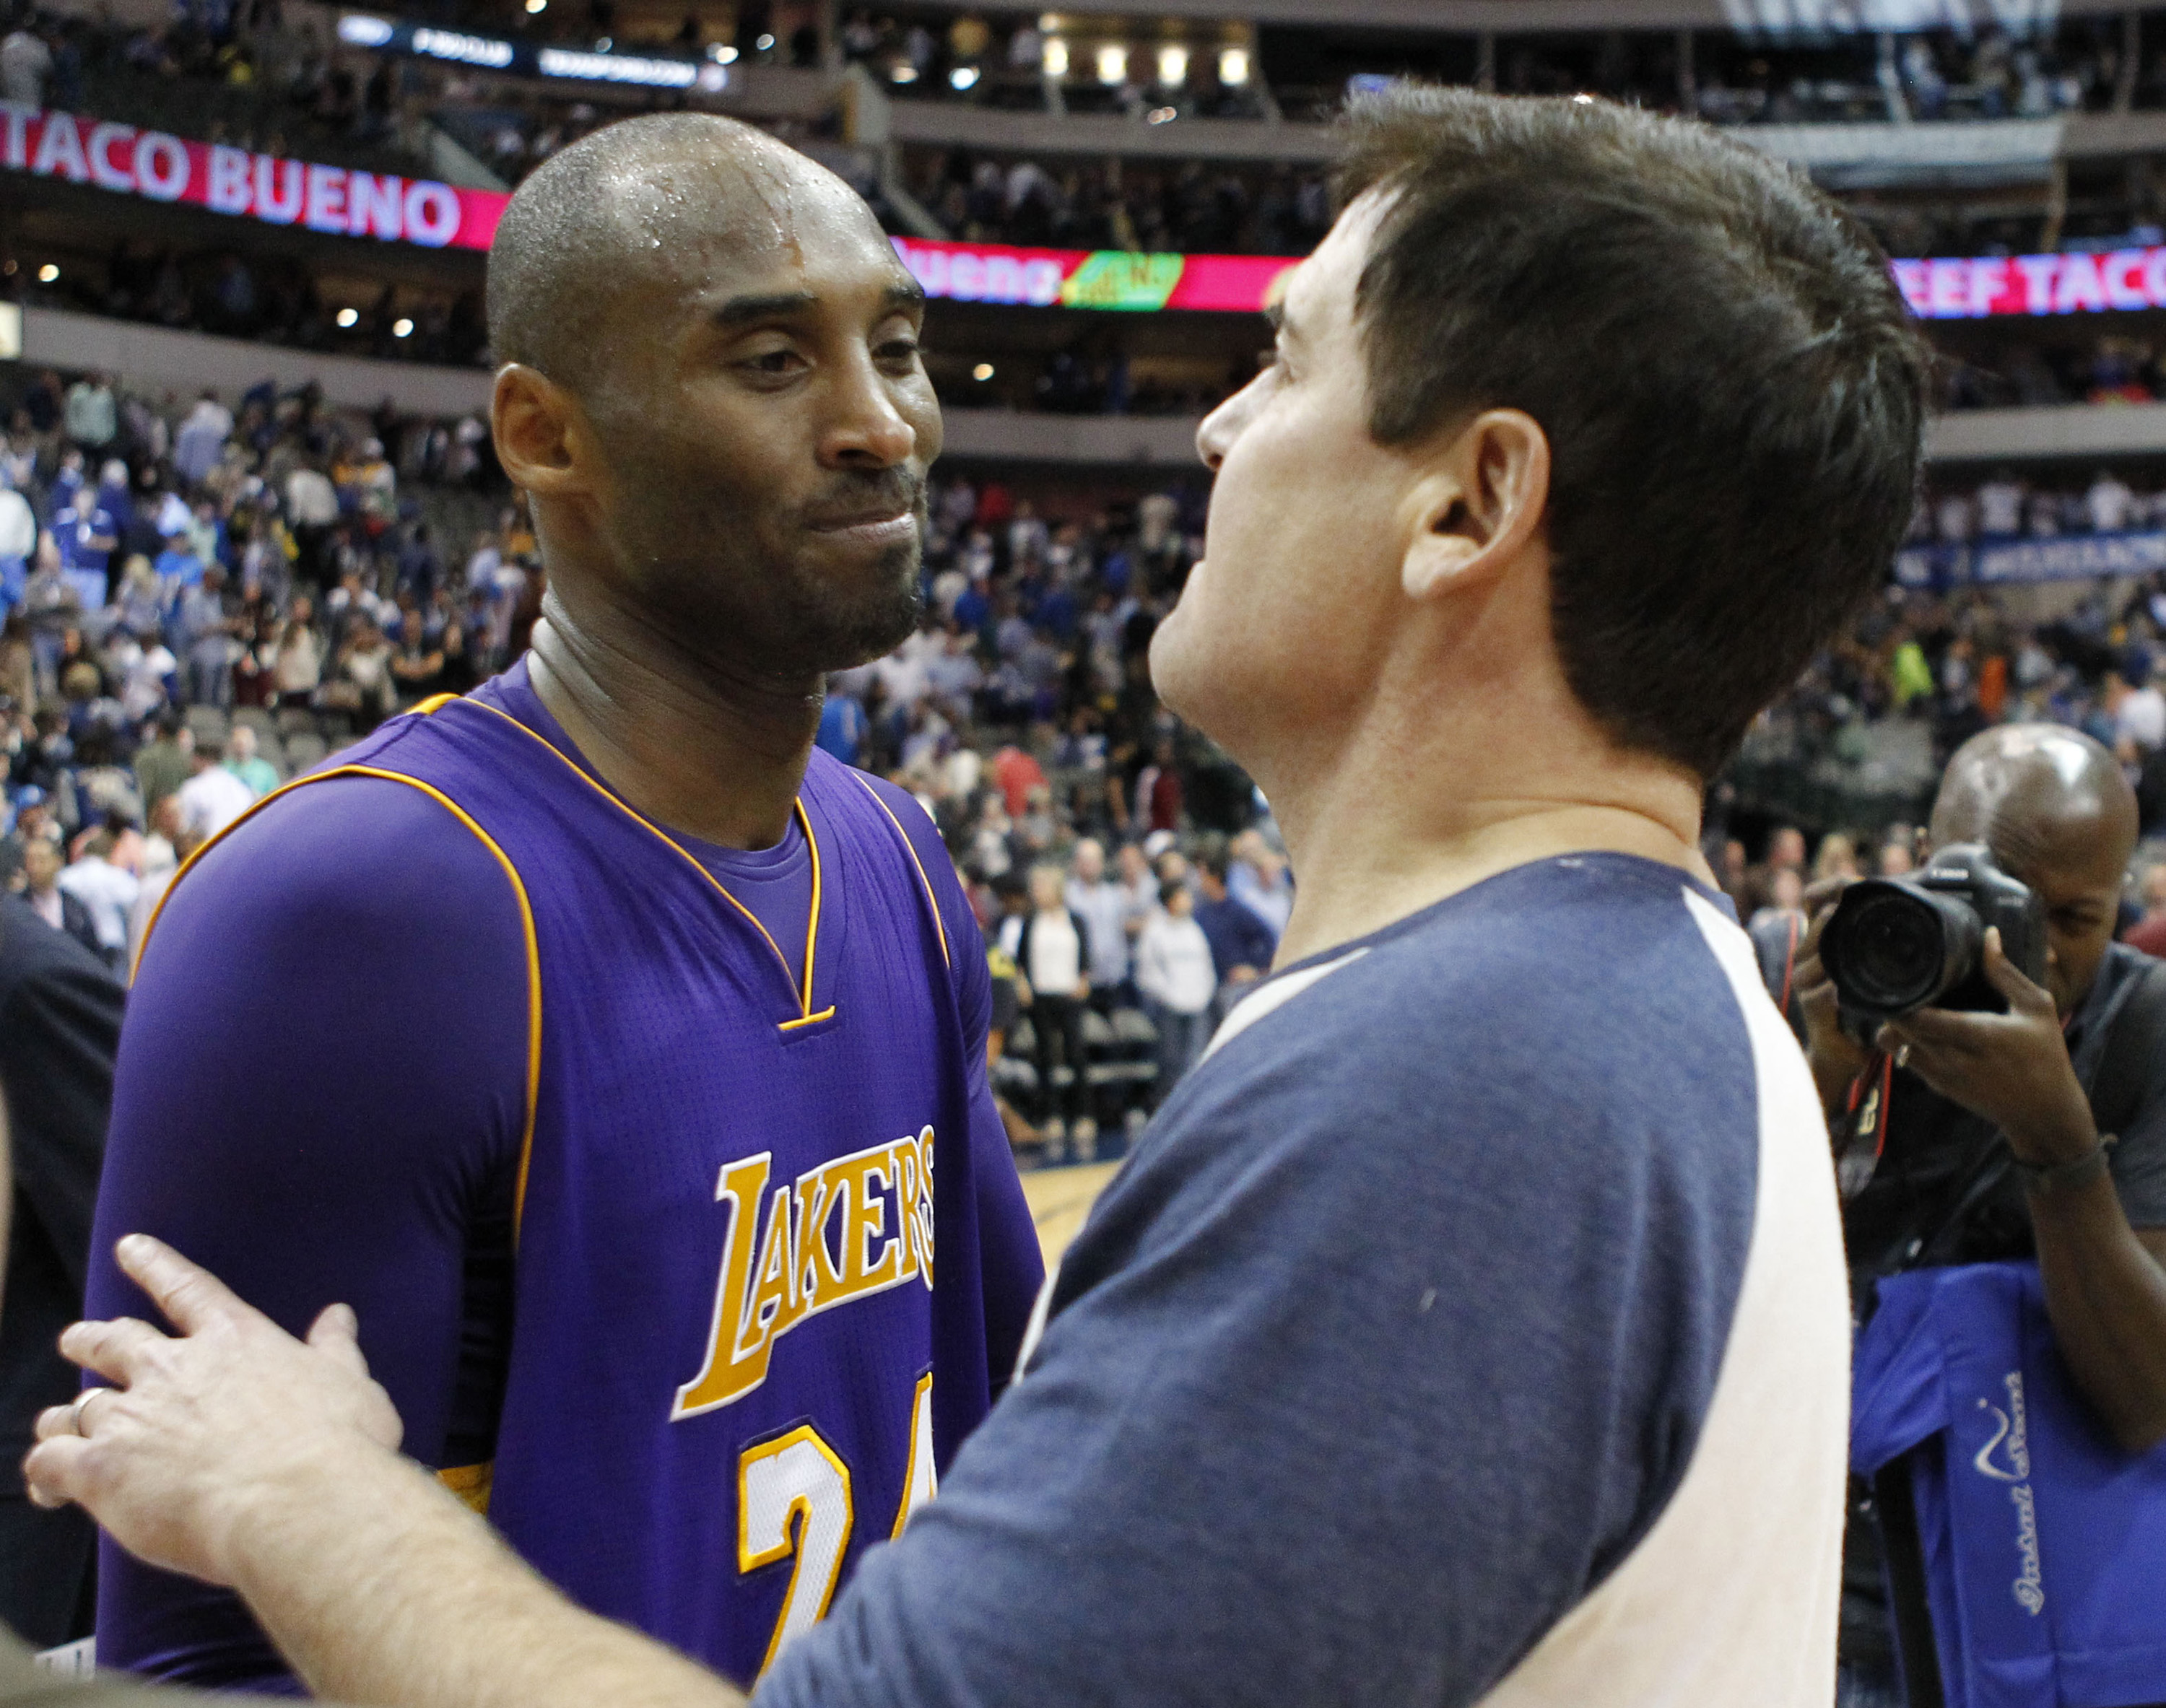 Lakers legend Kobe Bryant embraces Dallas Mavericks governor Mark Cuban after an NBA game in 2015